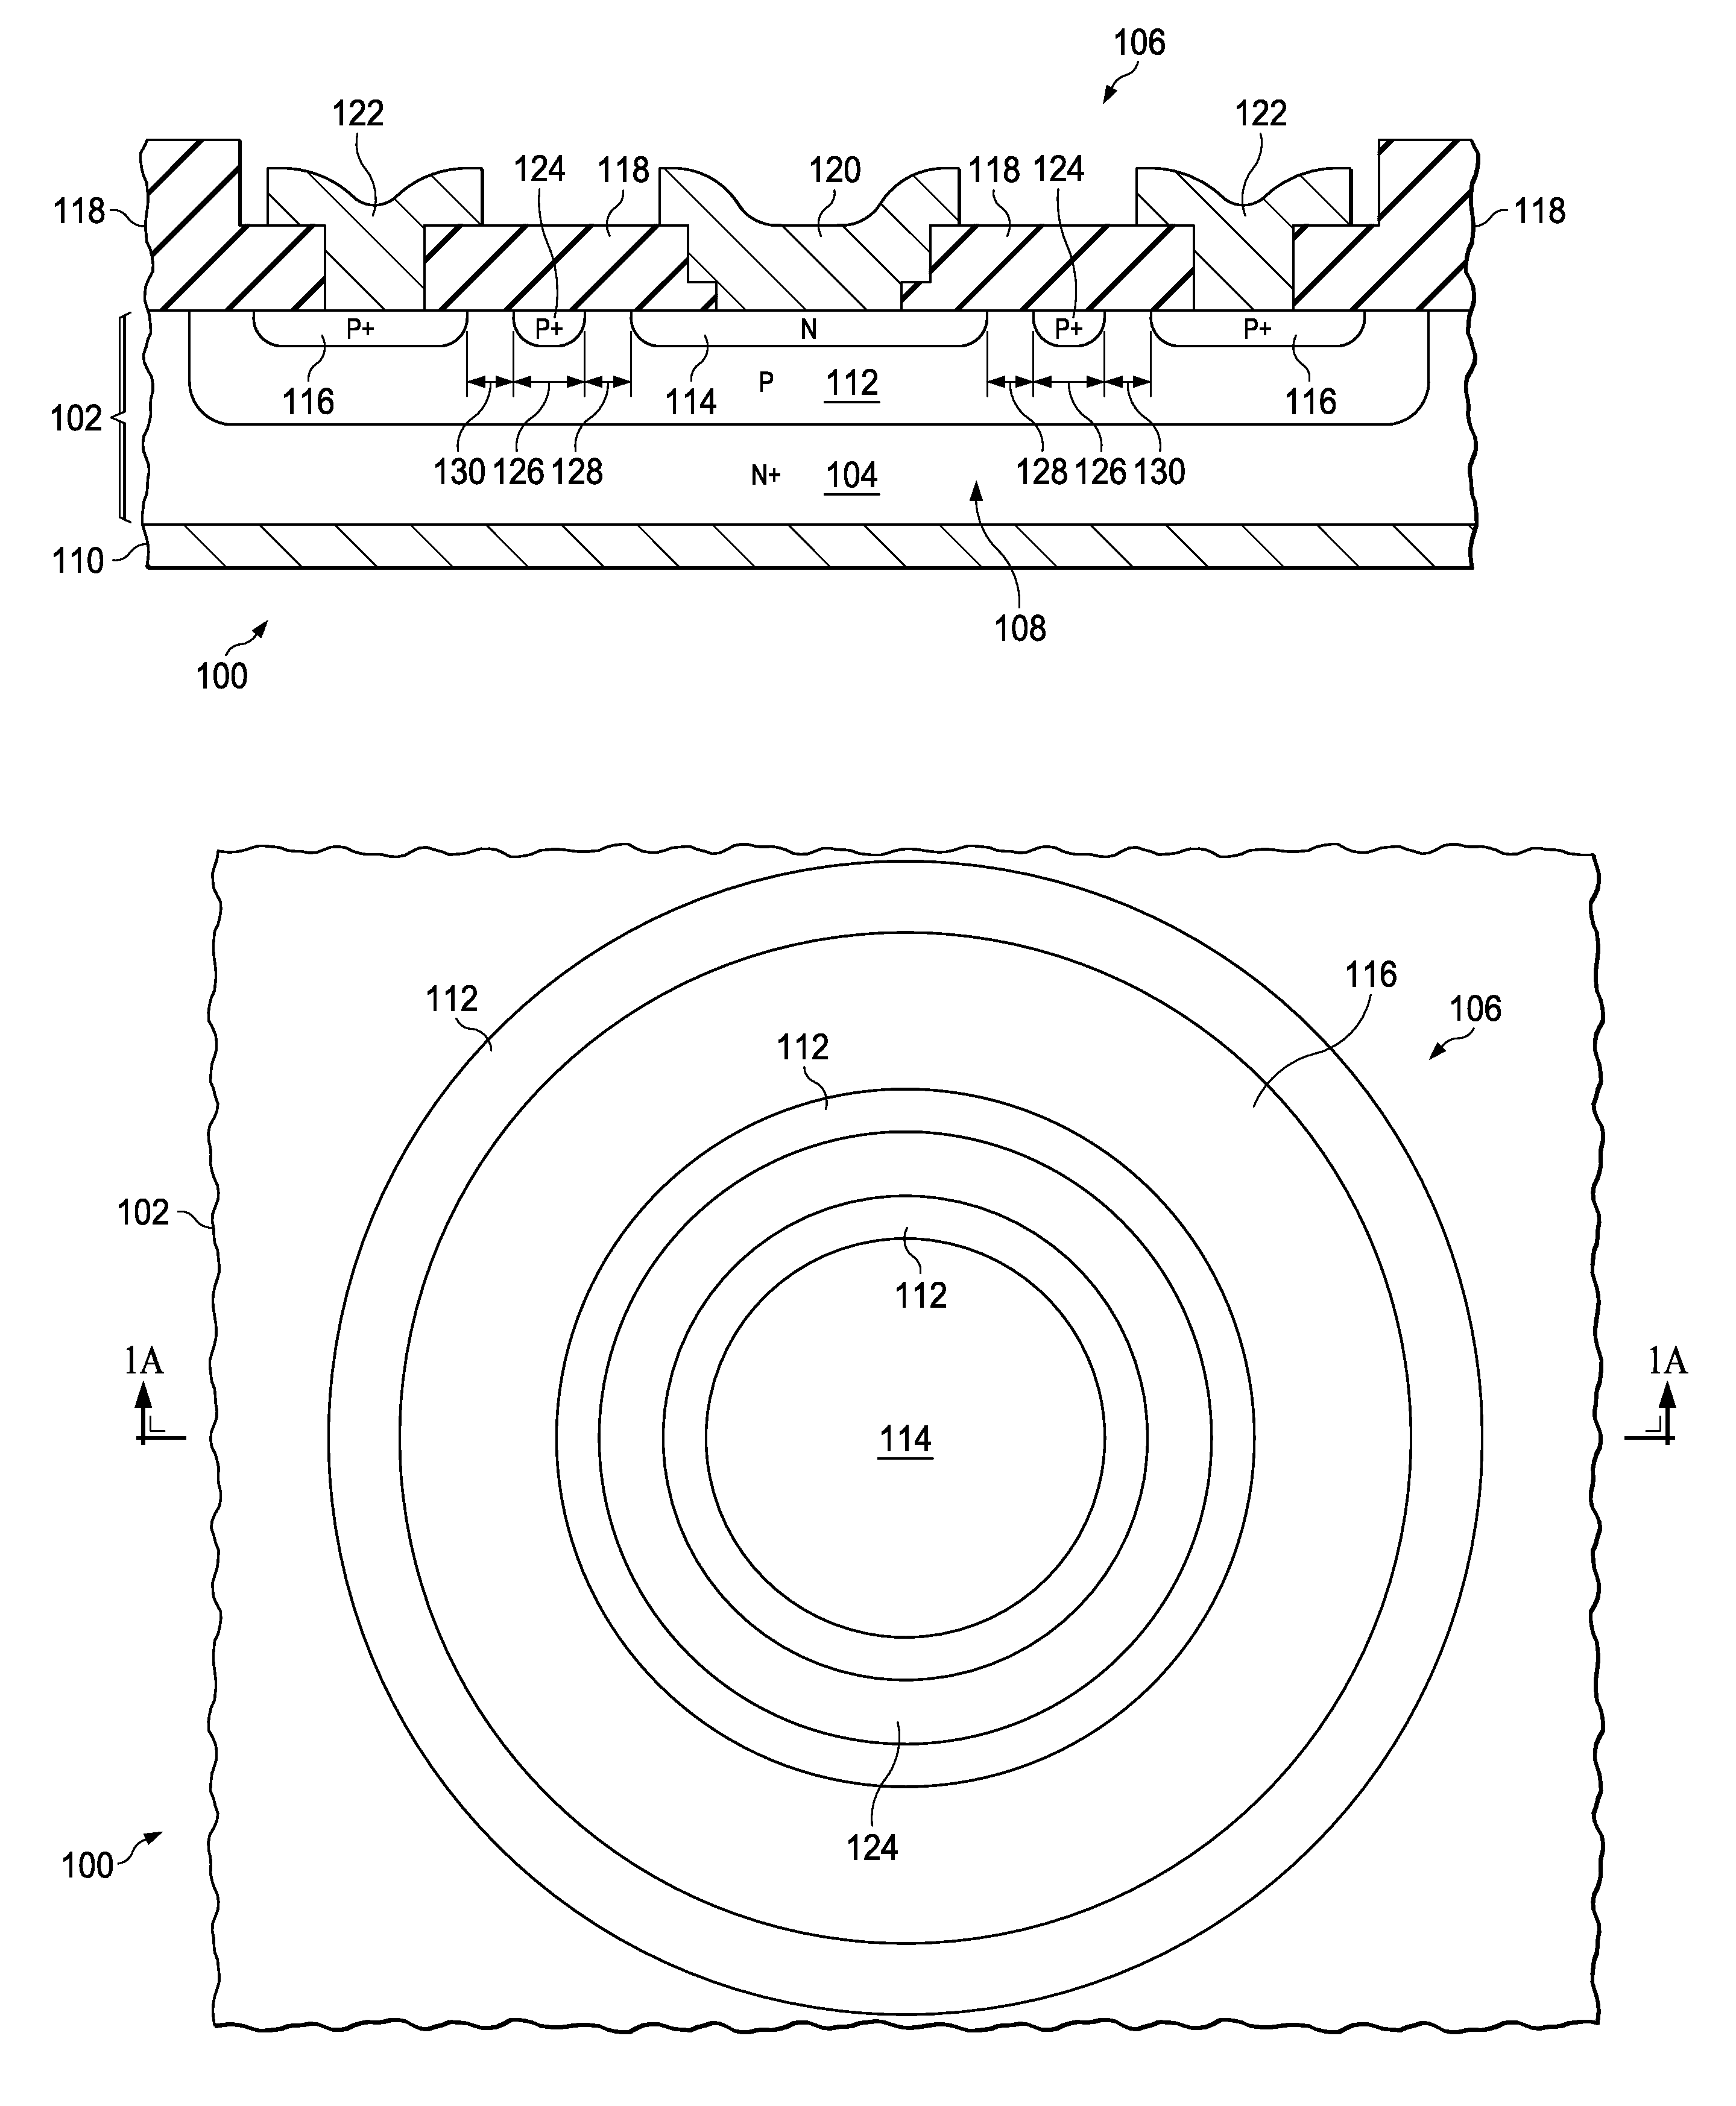 Radiation induced diode structure